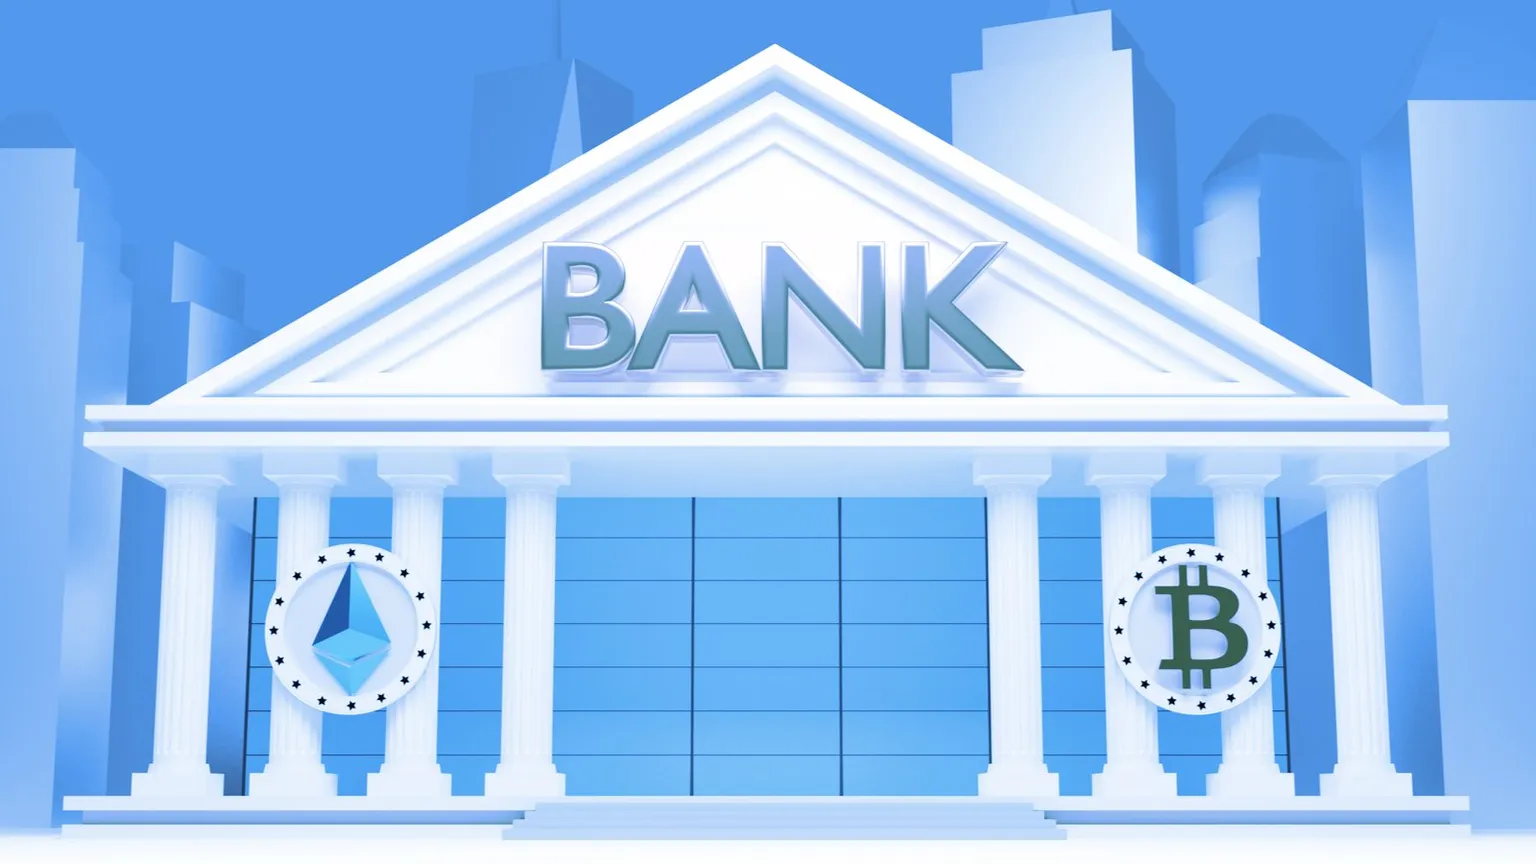 Banks and cryptos. Image: Shutterstock